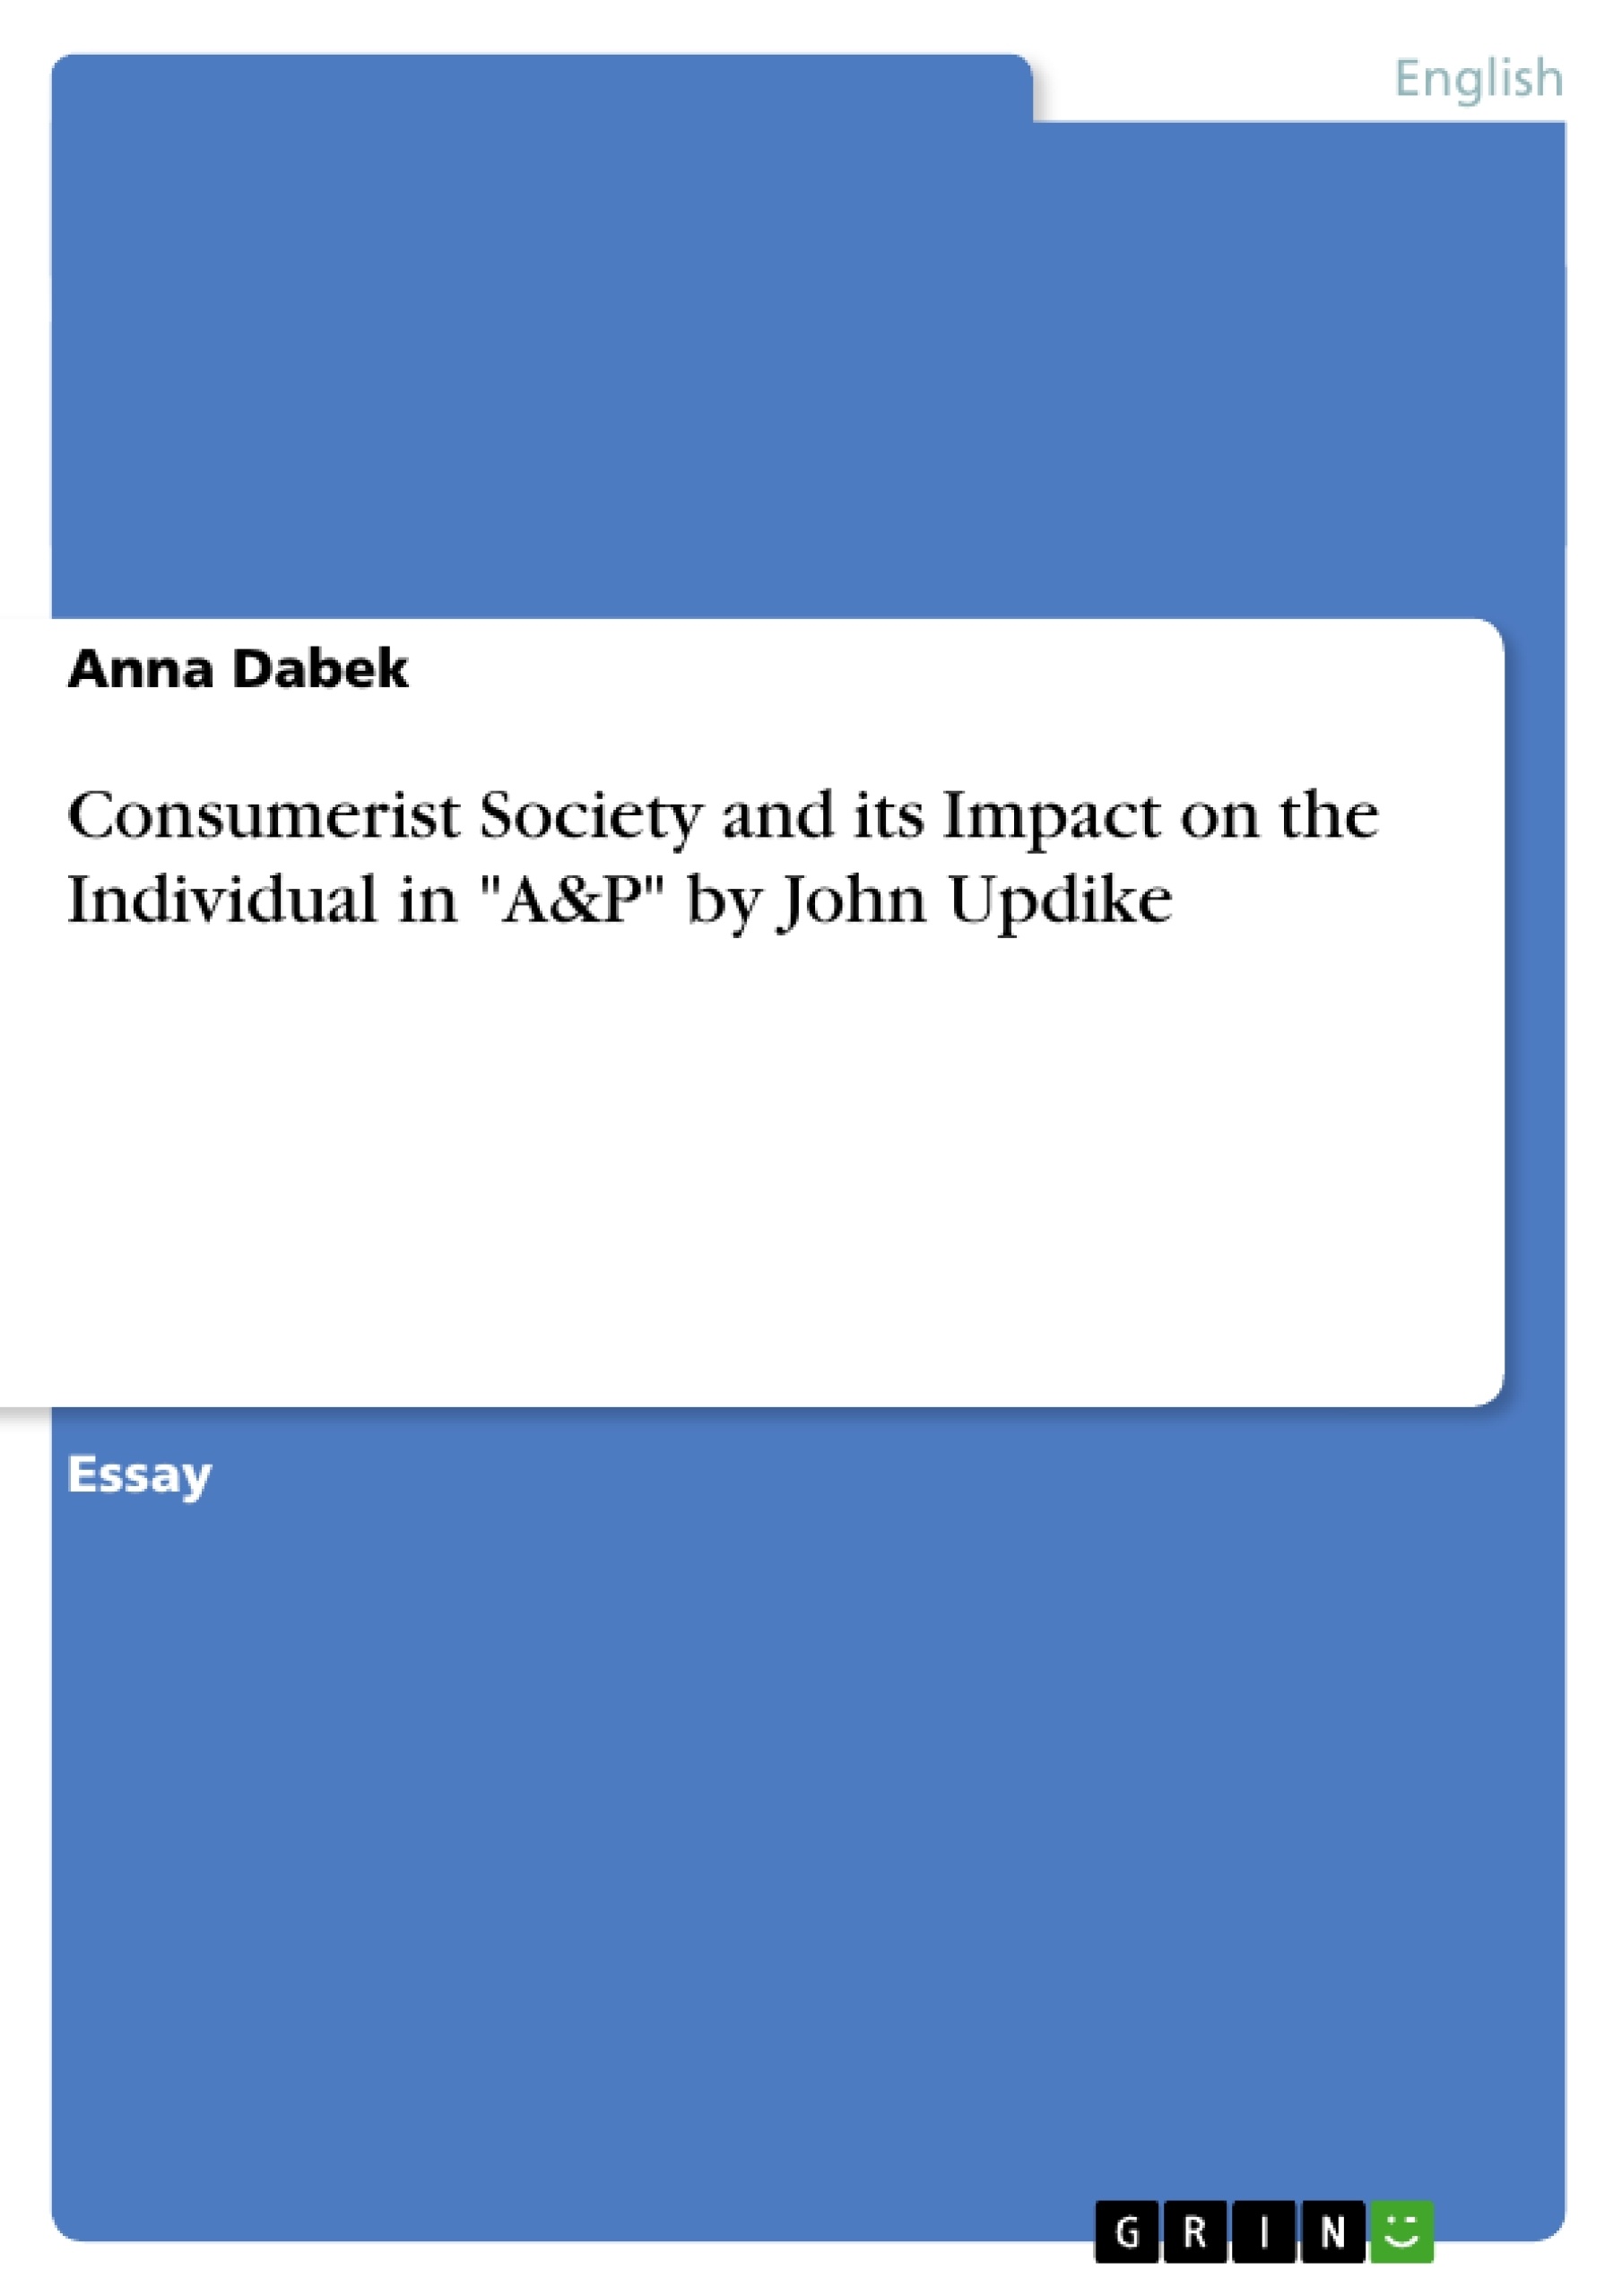 Title: Consumerist Society and its Impact on the Individual in "A&P" by John Updike